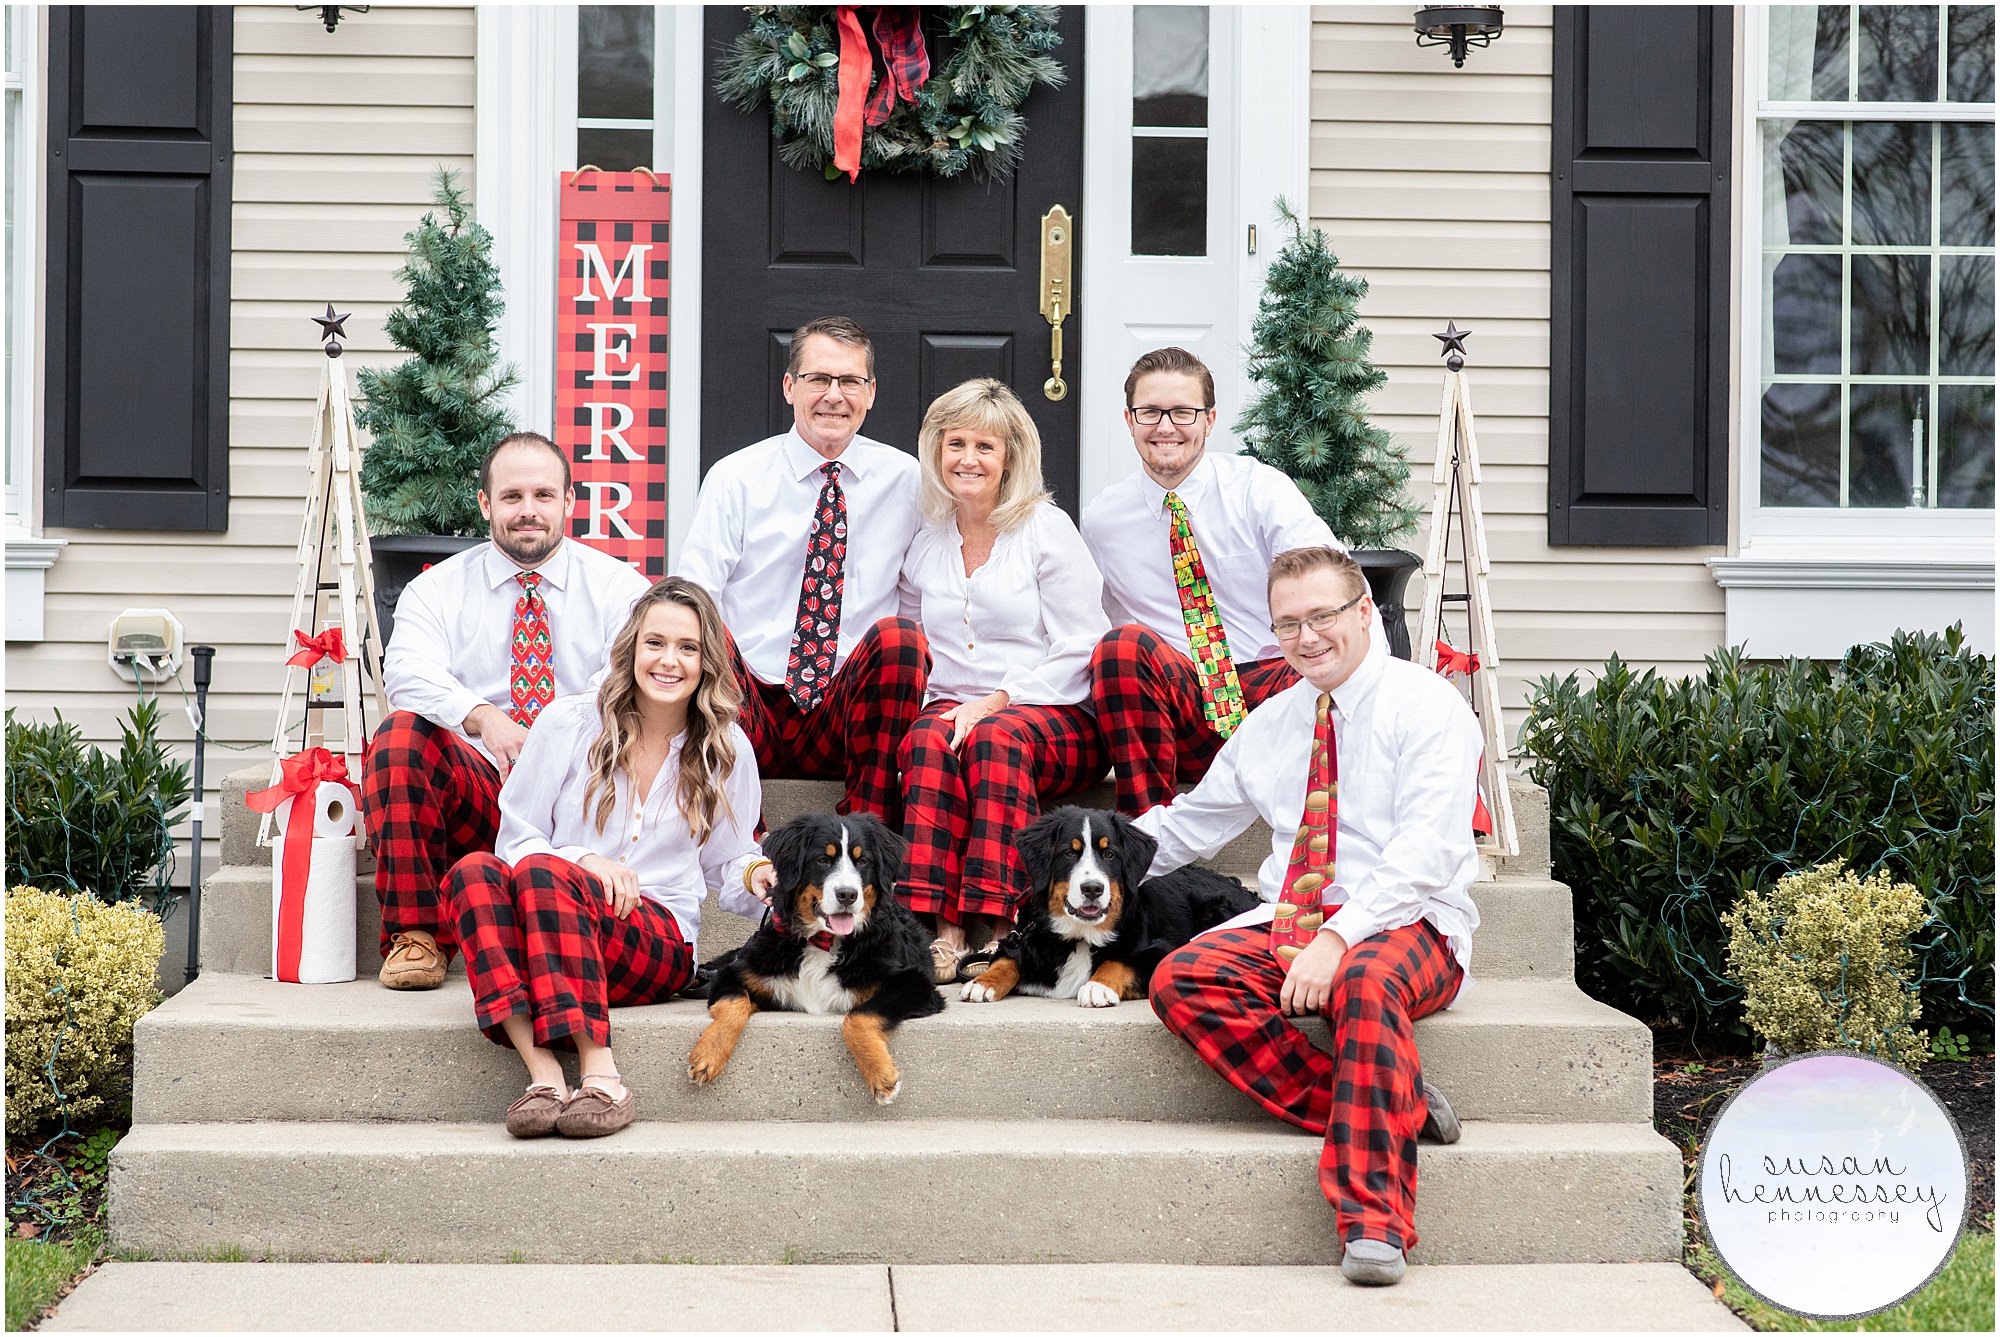 Susan Hennessey Photography, a photographer based in Moorestown, NJ photographs yearly South Jersey holiday family photo sessions throughout the Fall. 